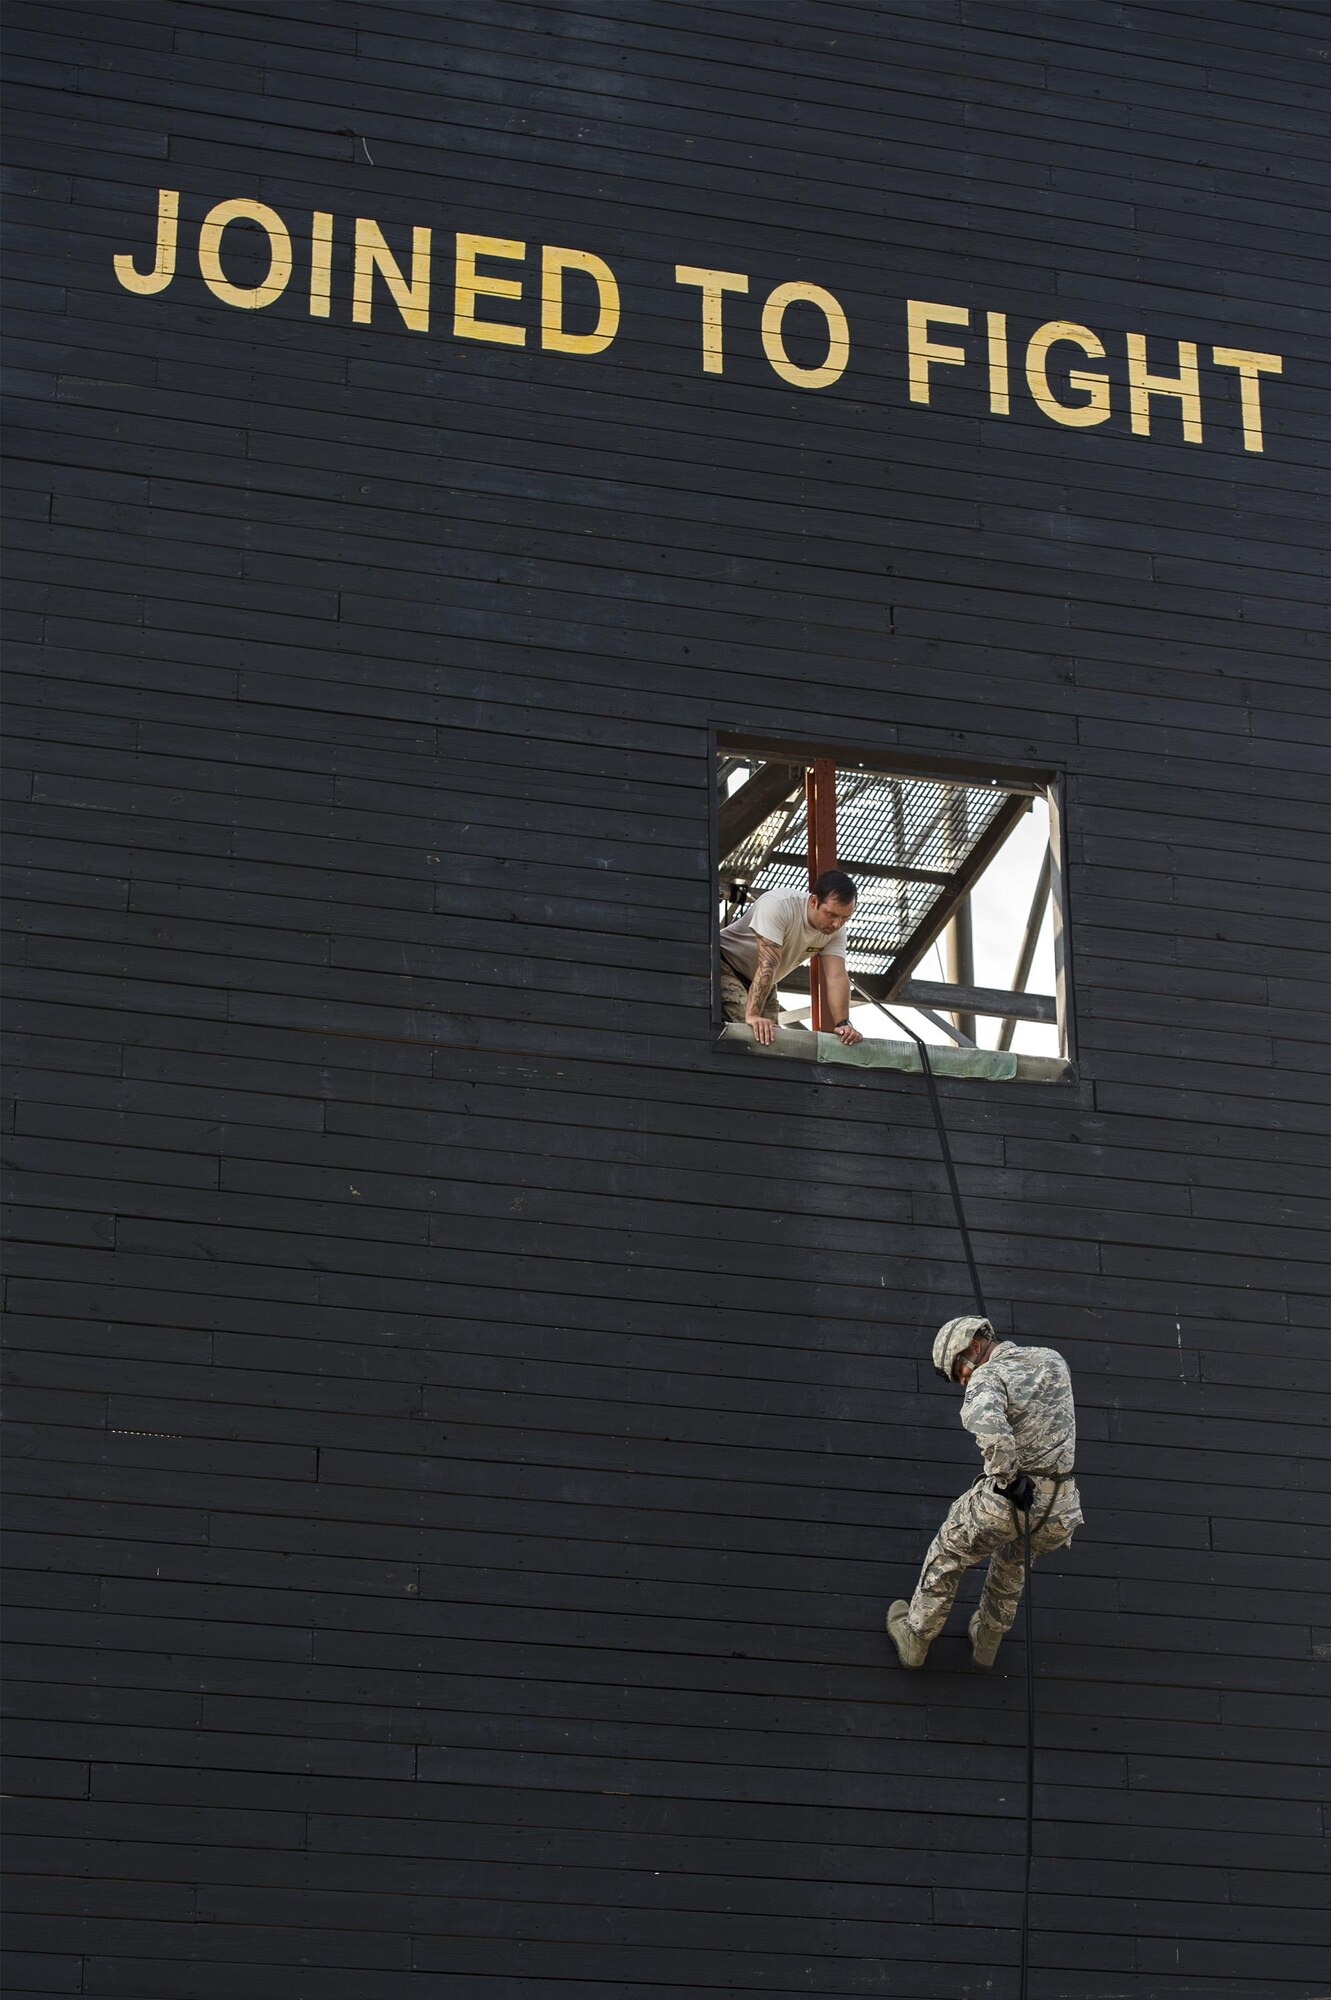 Tech. Sgt. Matthew Meade, 820th Combat Operations Squadron NCO in charge future operations, watches as Tech. Sgt. Brandon Arroyo, 105th Base Defense Squadron squad leader, rappels during training, Sept. 29, 2016, at Moody Air Force Base, Ga. The 820th Base Defense Group was able to use its post-deployment experience and training resources to help train the Air National Guardsmen of the 105th BDS. (U.S. Air Force photo by Tech. Sgt. Zachary Wolf)
